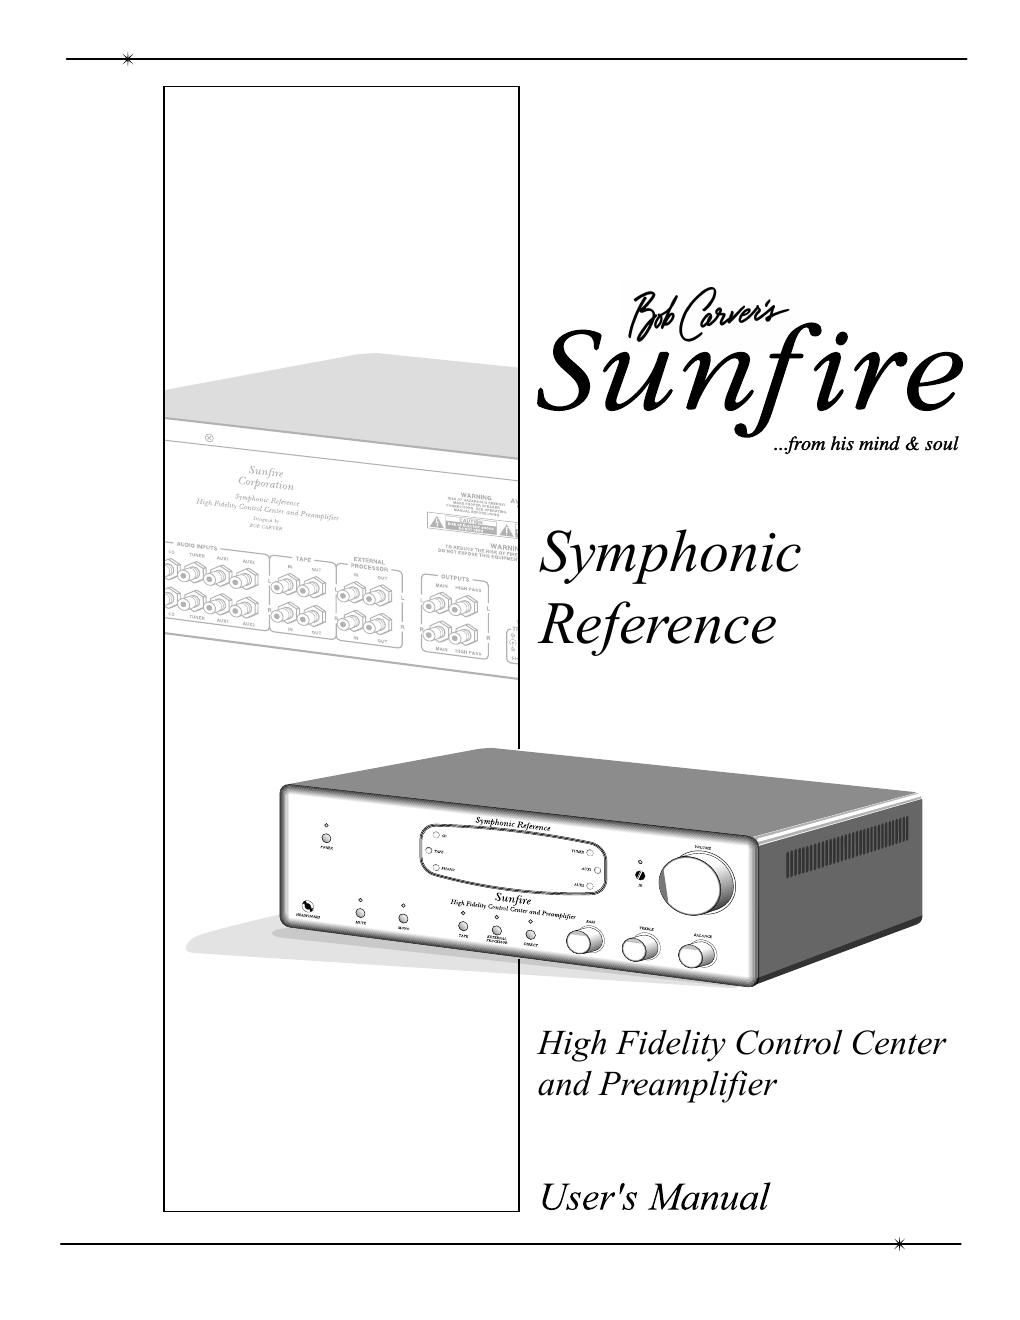 sunfire symphonic reference owners manual